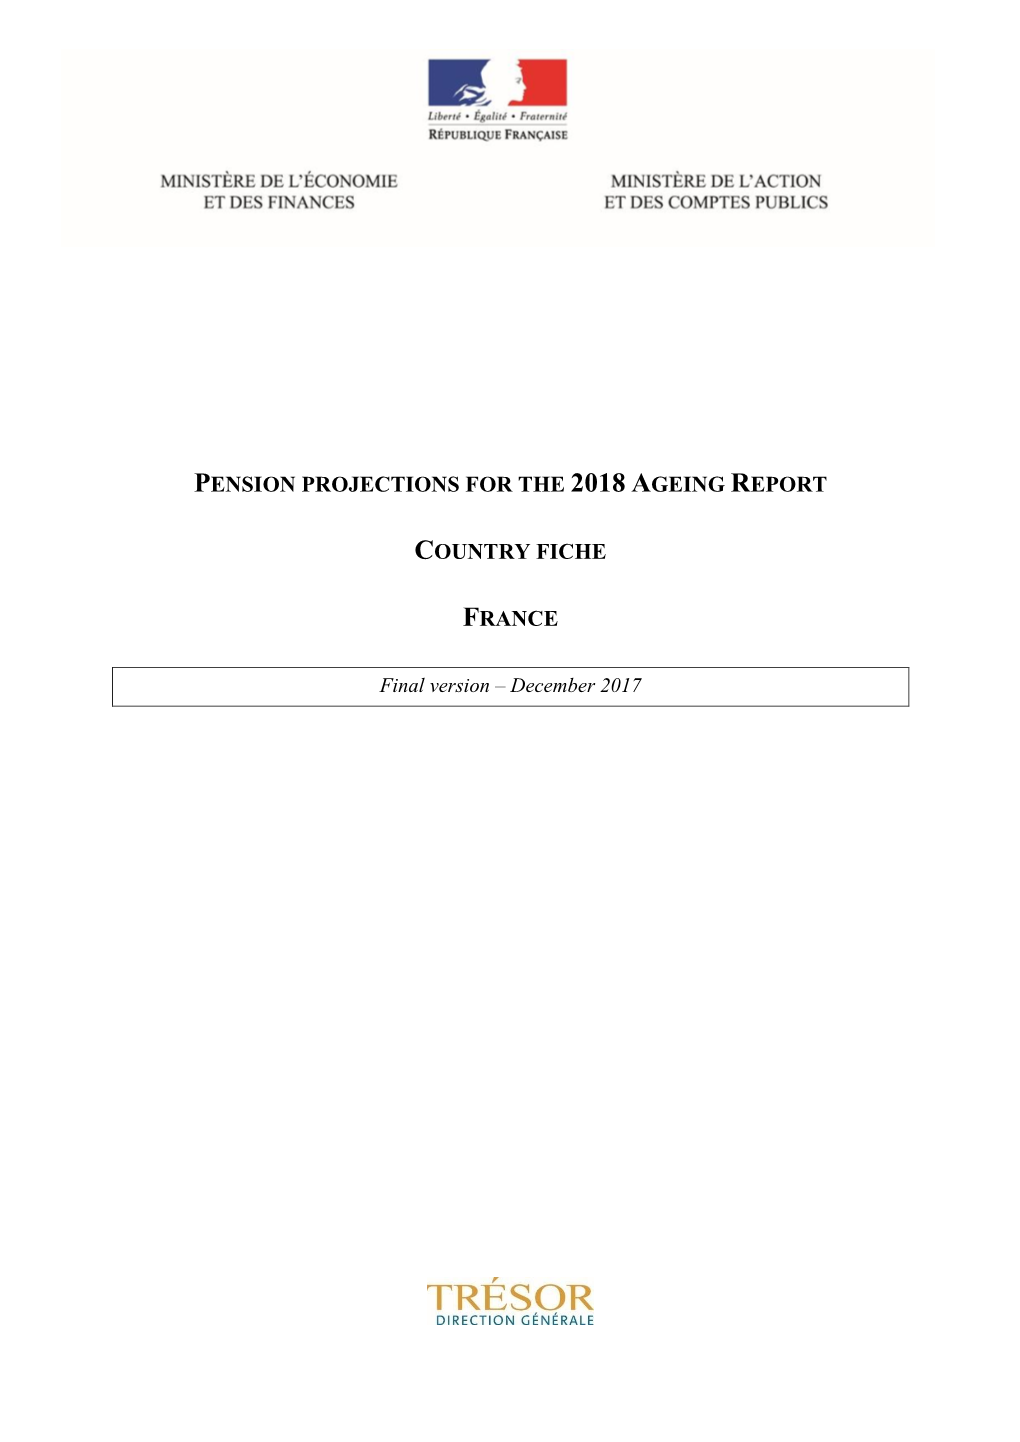 Pension Projections for the 2018 Ageing Report Country Fiche France